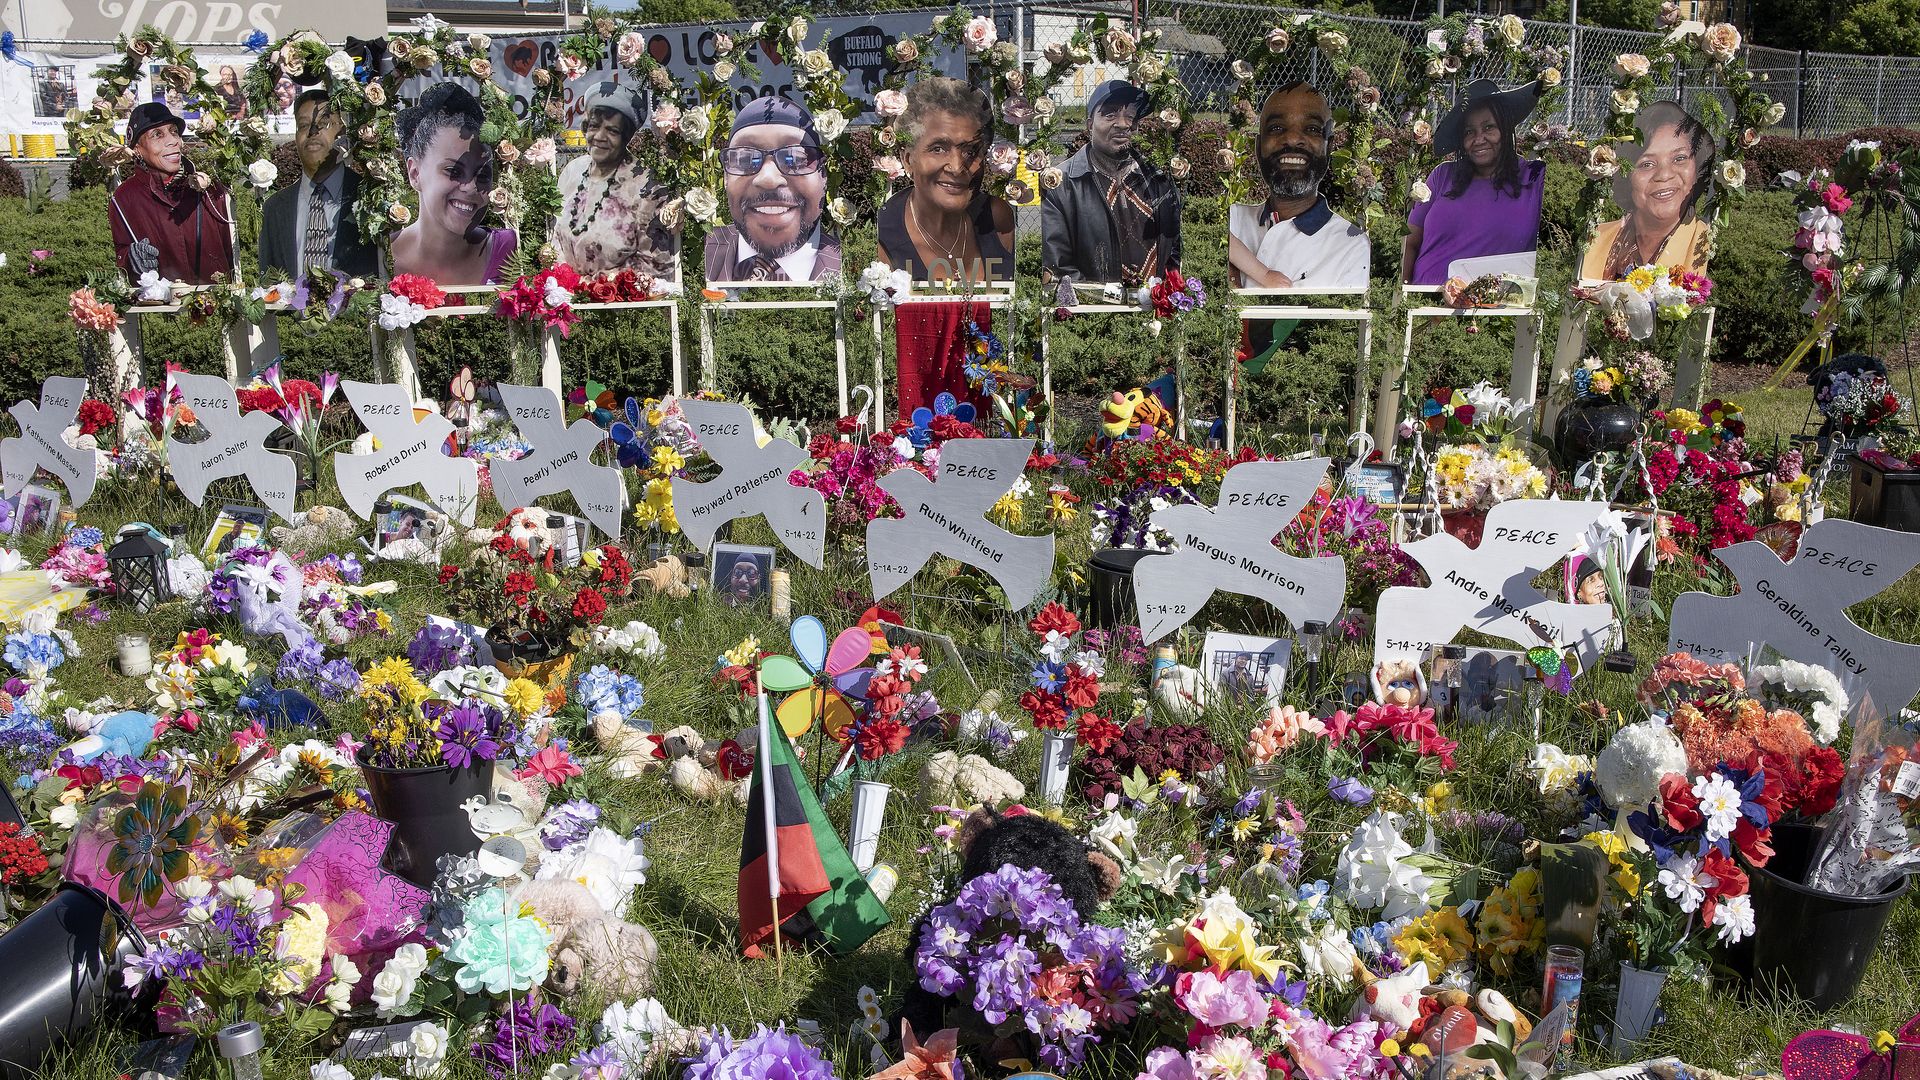 Street memorials of flowers and candles and messages surround the Tops supermarket where a racist gunman murdered ten African Americans with an assault rifle, June 18, 2022